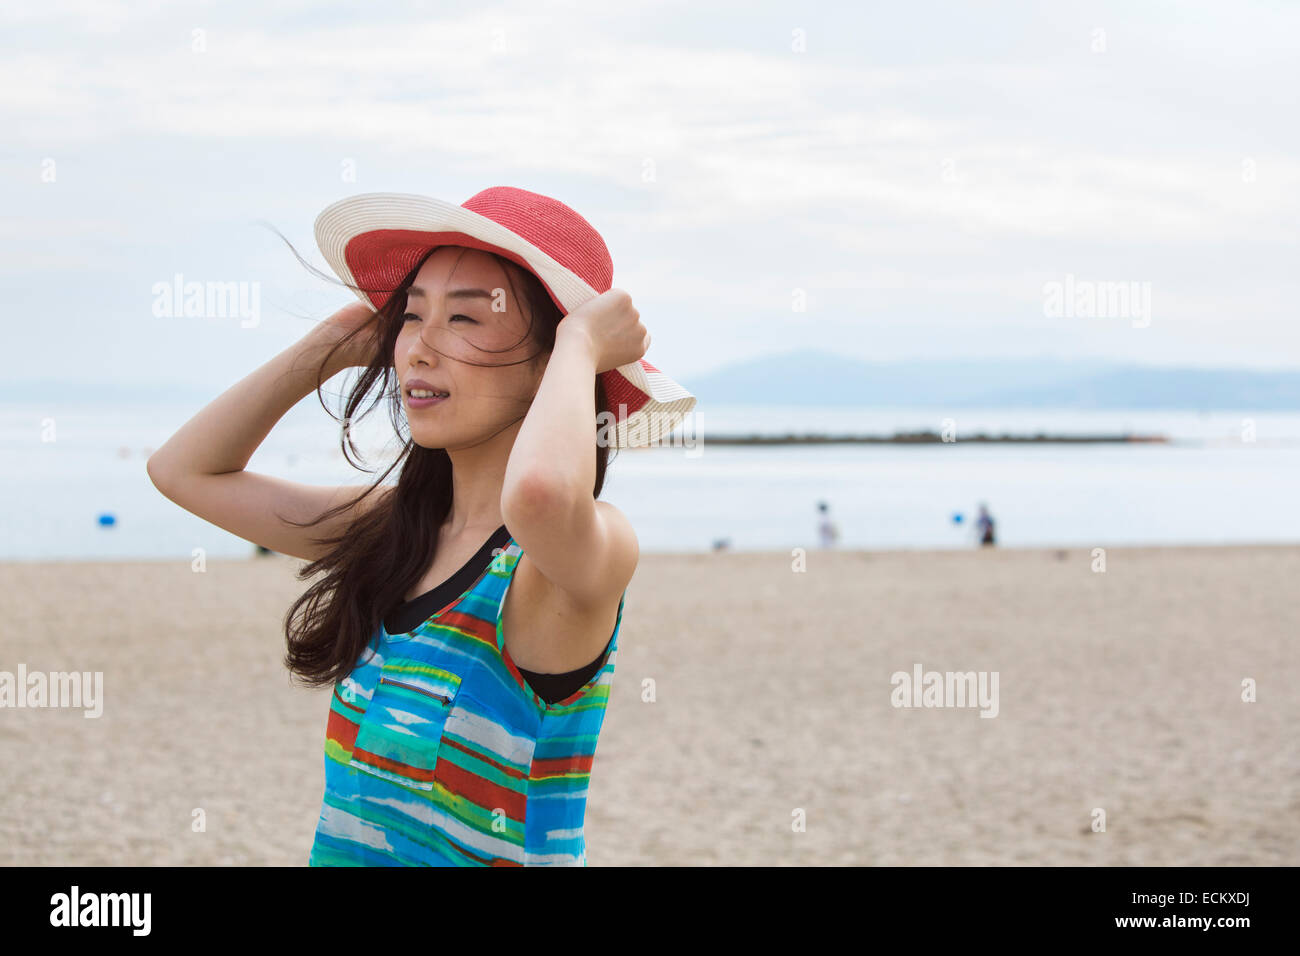 A woman on a beach in Kobe holding her hat on. Stock Photo